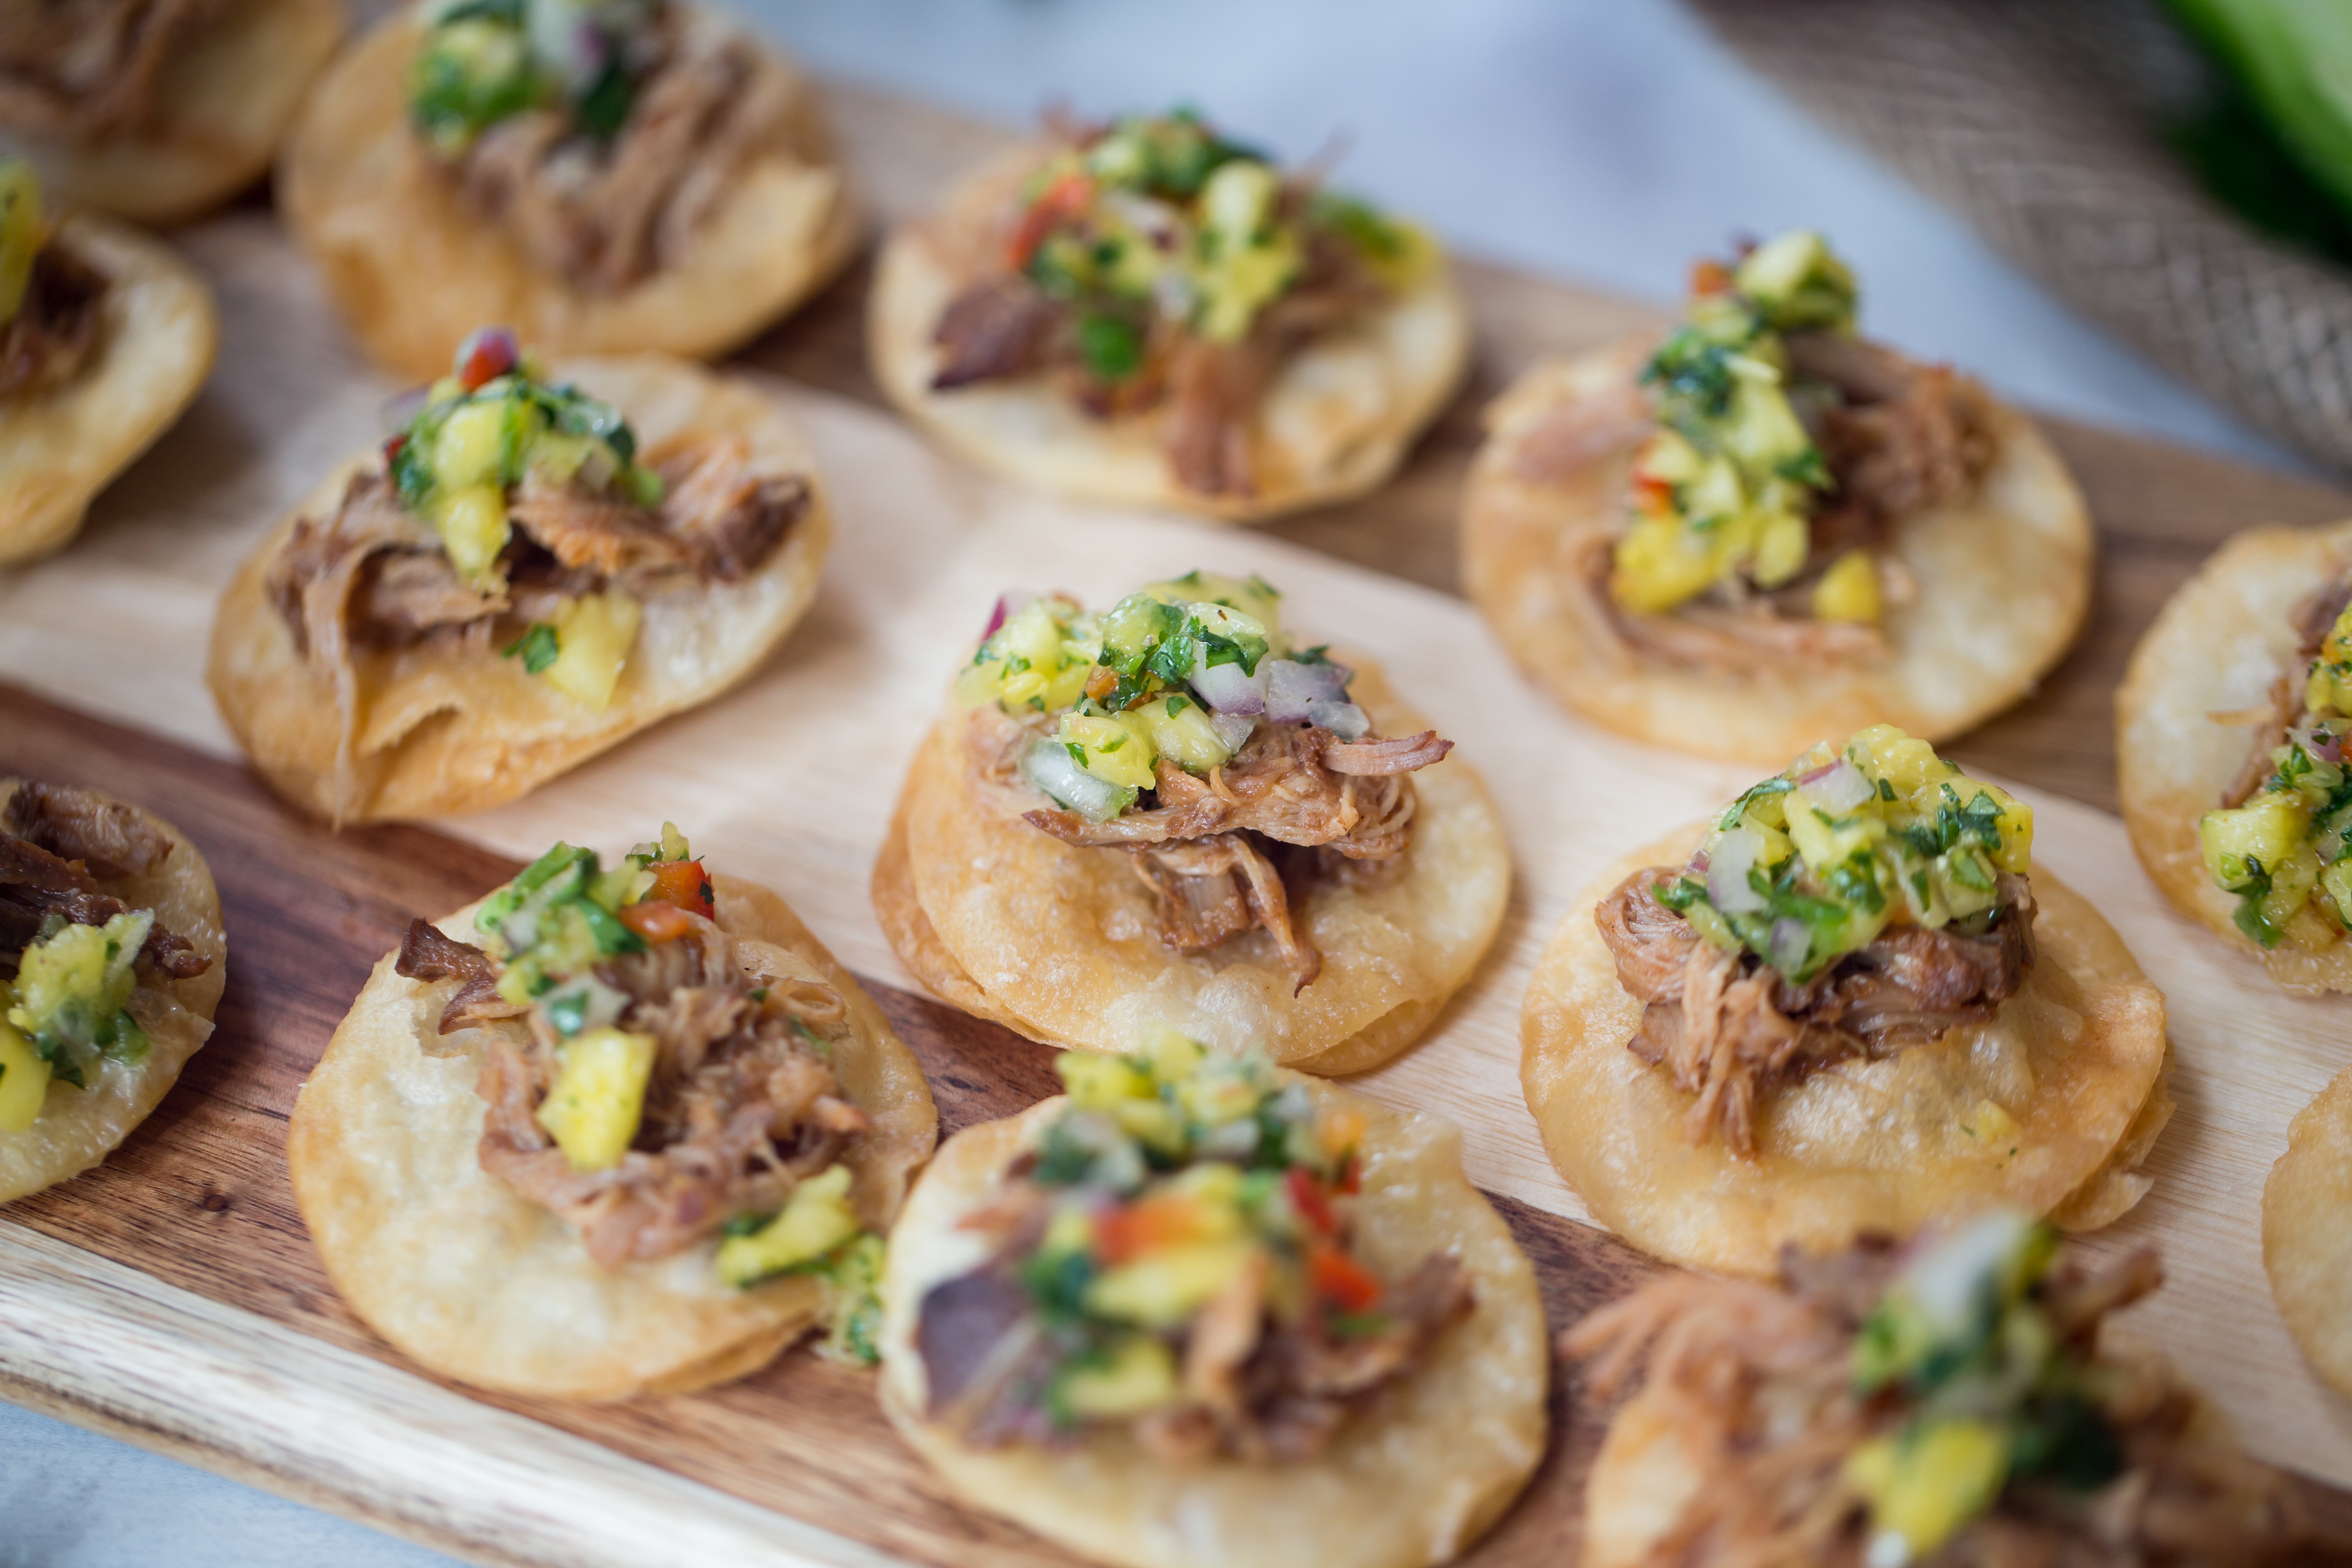 Pulled pork canapes with pineapple salsa